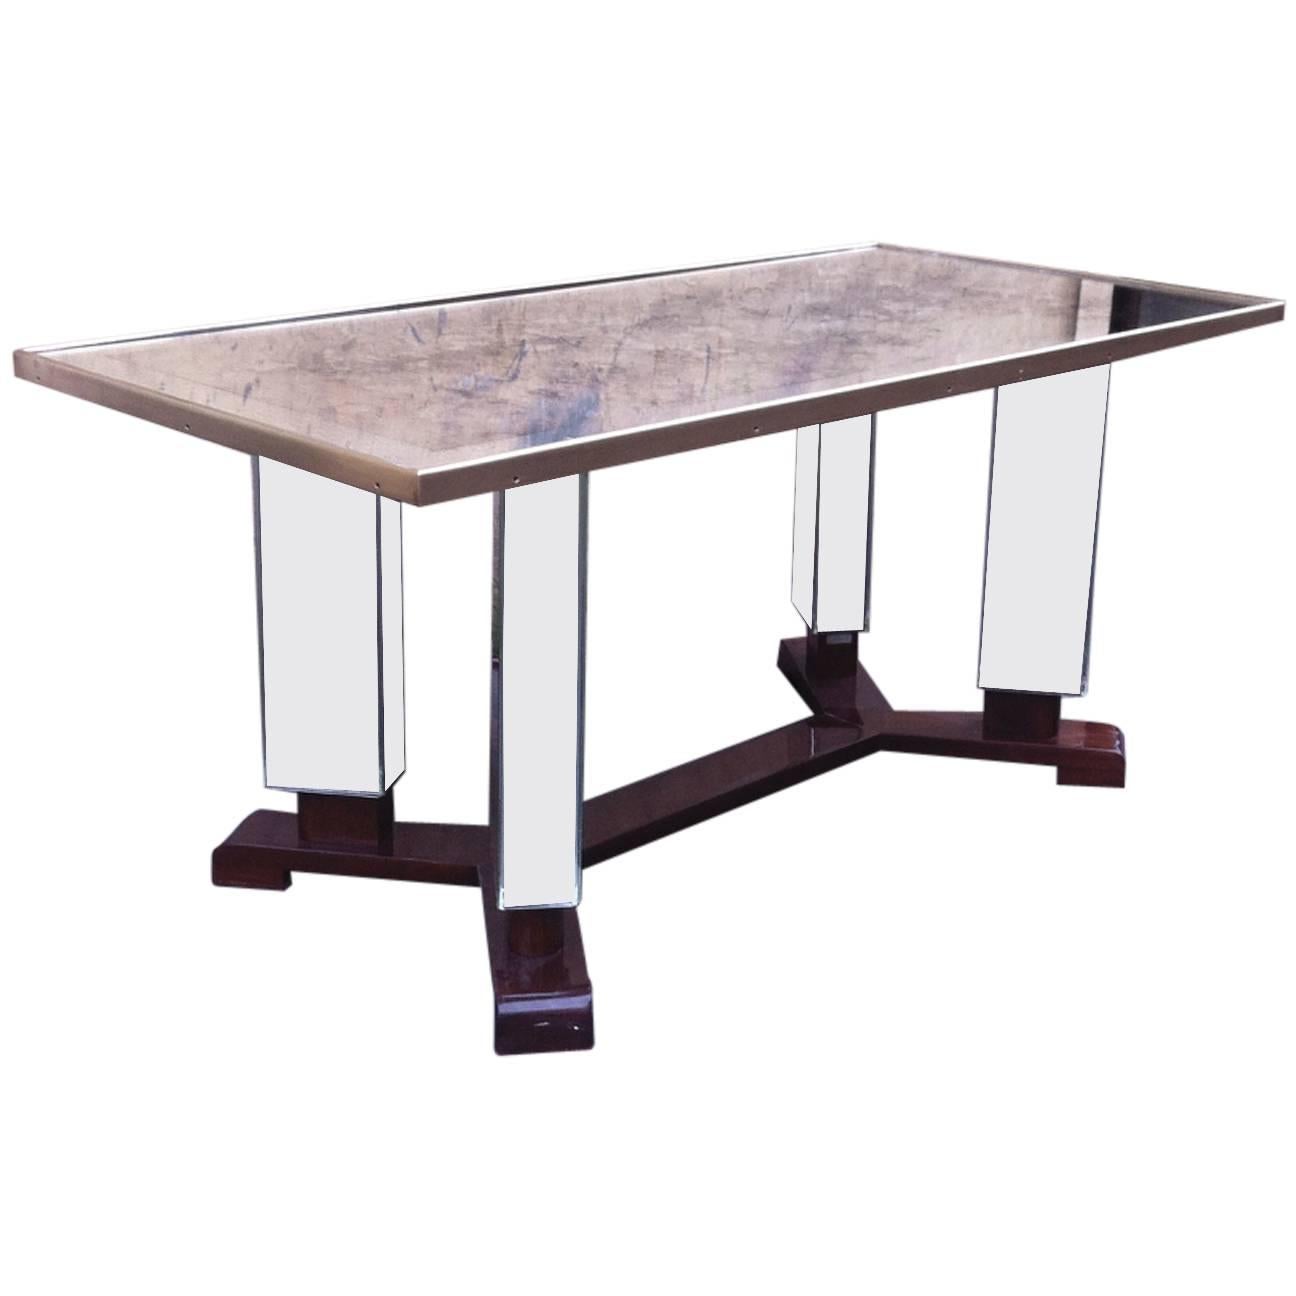 Jules Leleu Signed and Documented Mirrored Coffee Table